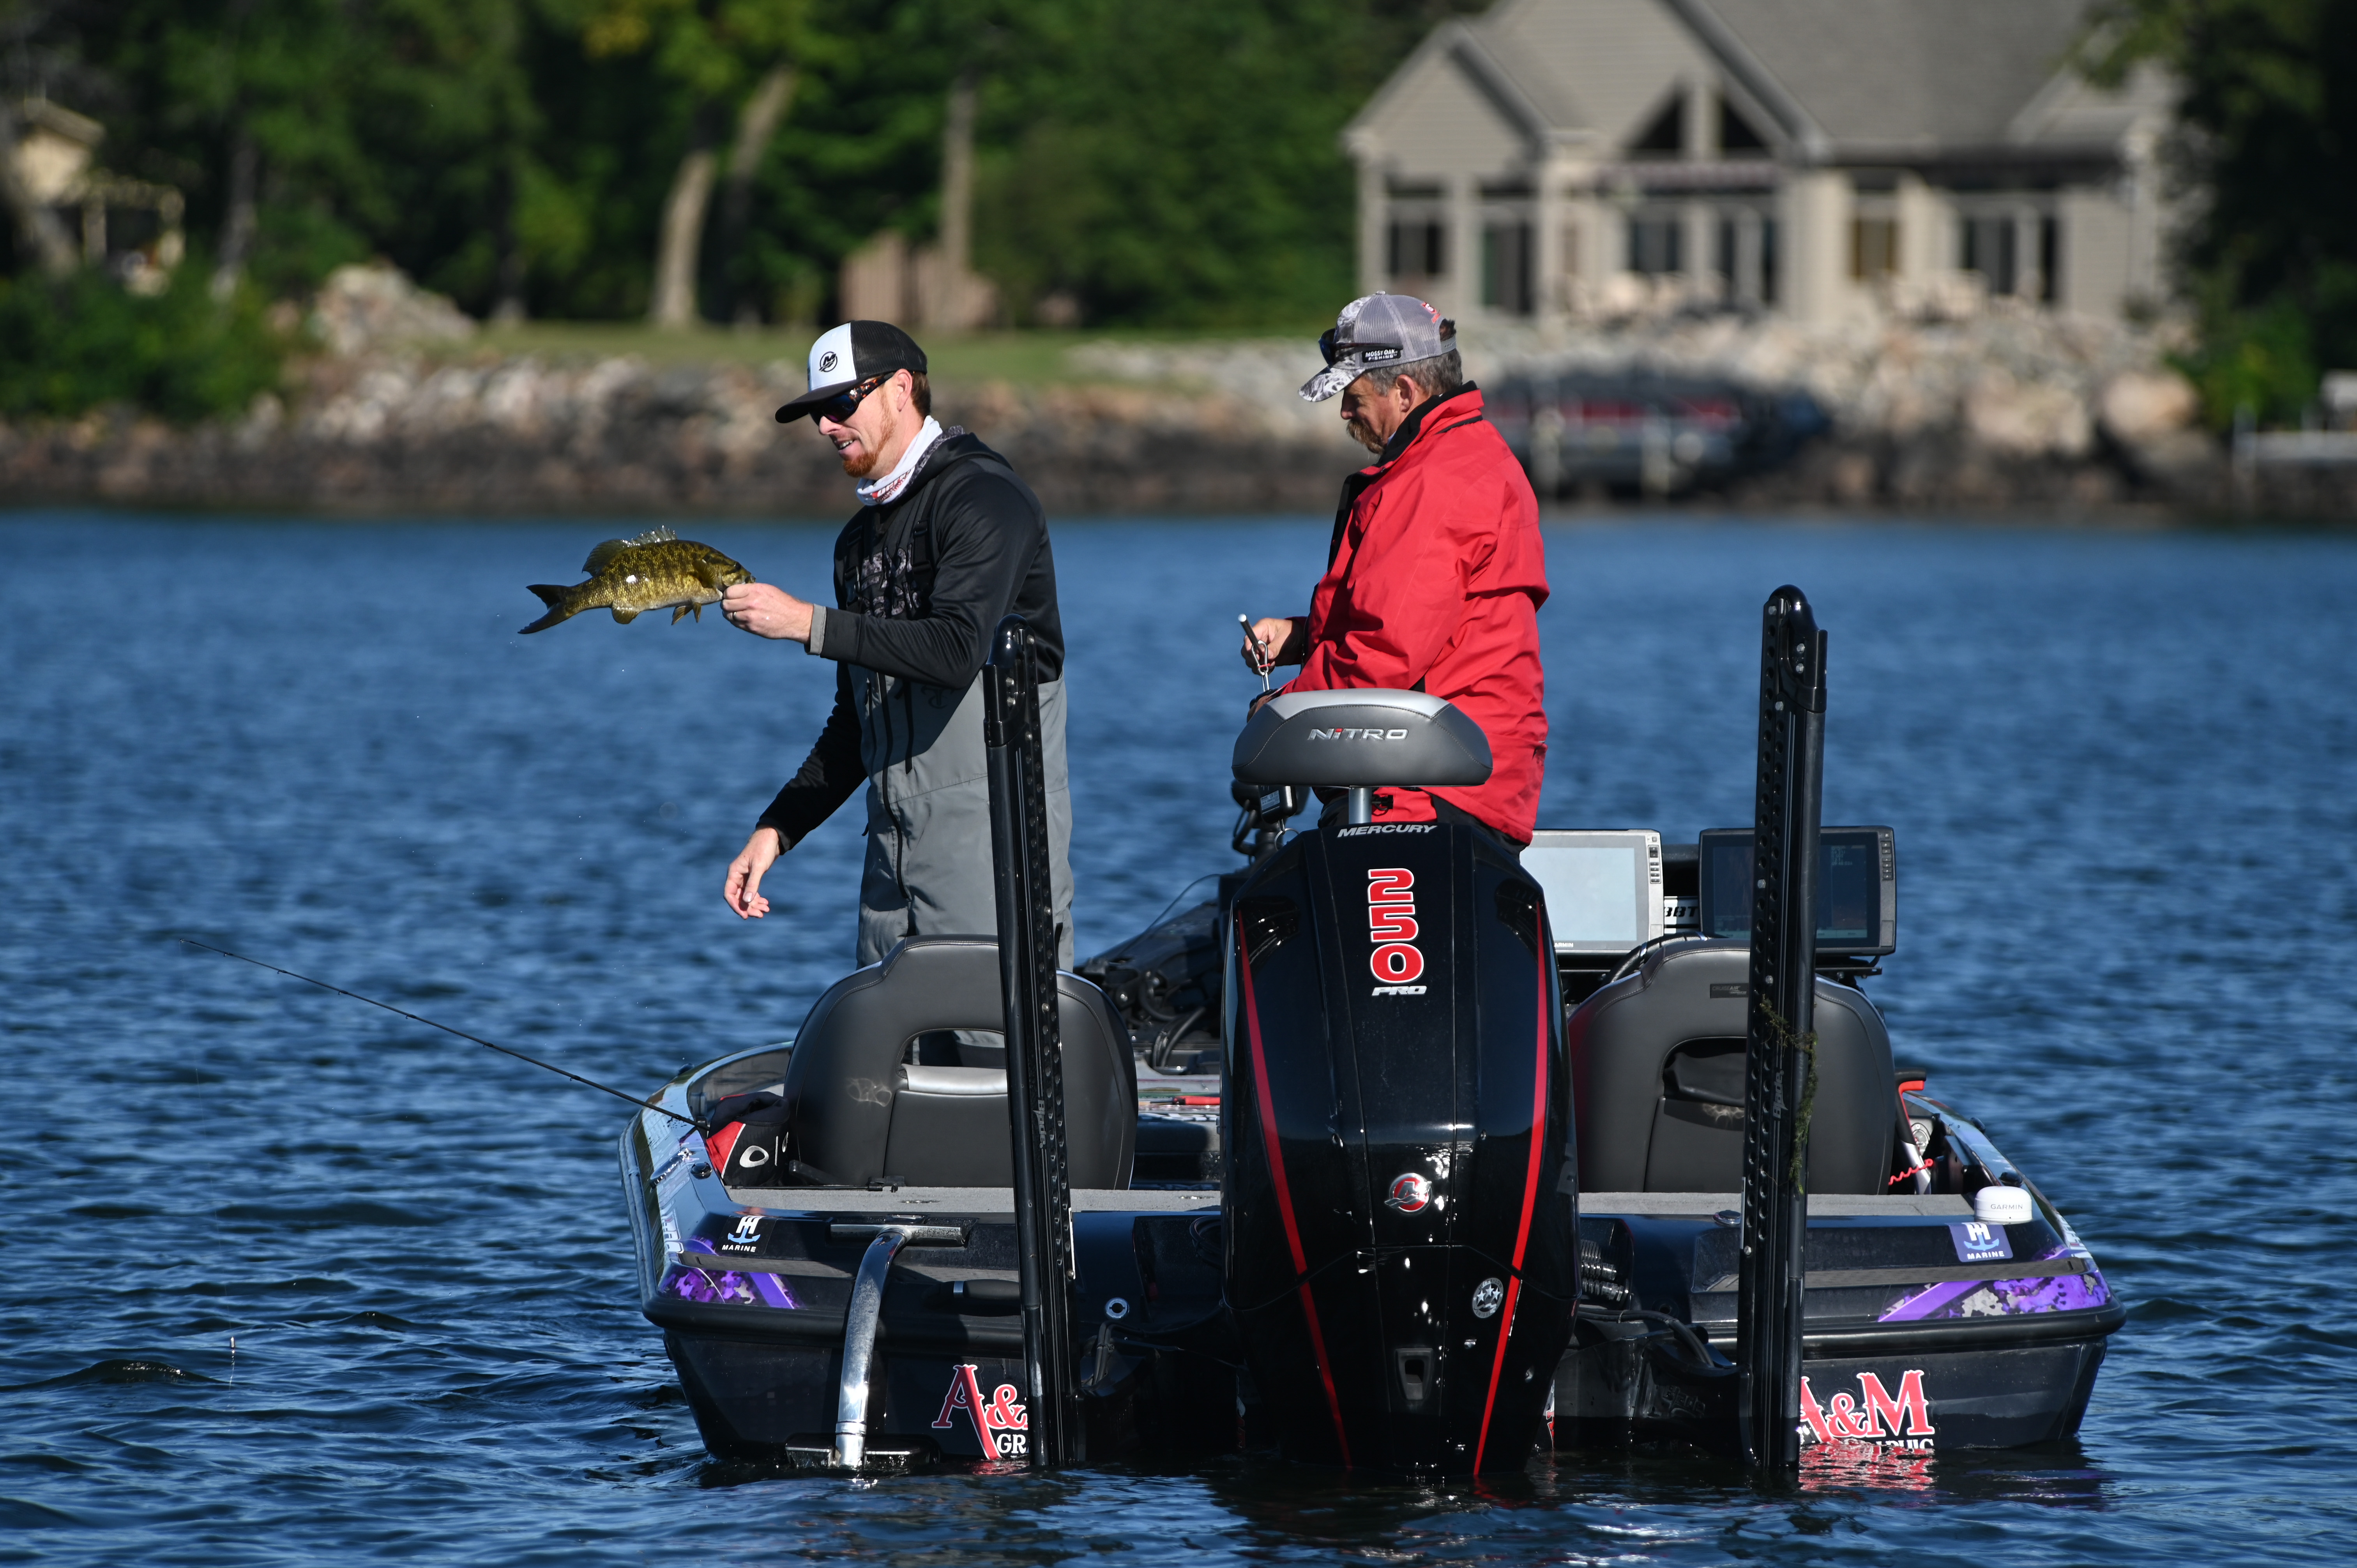 Josh Bertrand Leads Early After Day 1 of Bass Pro Tour Bally Bet Stage  Seven at Mille Lacs Lake Presented by Minn Kota - Major League Fishing